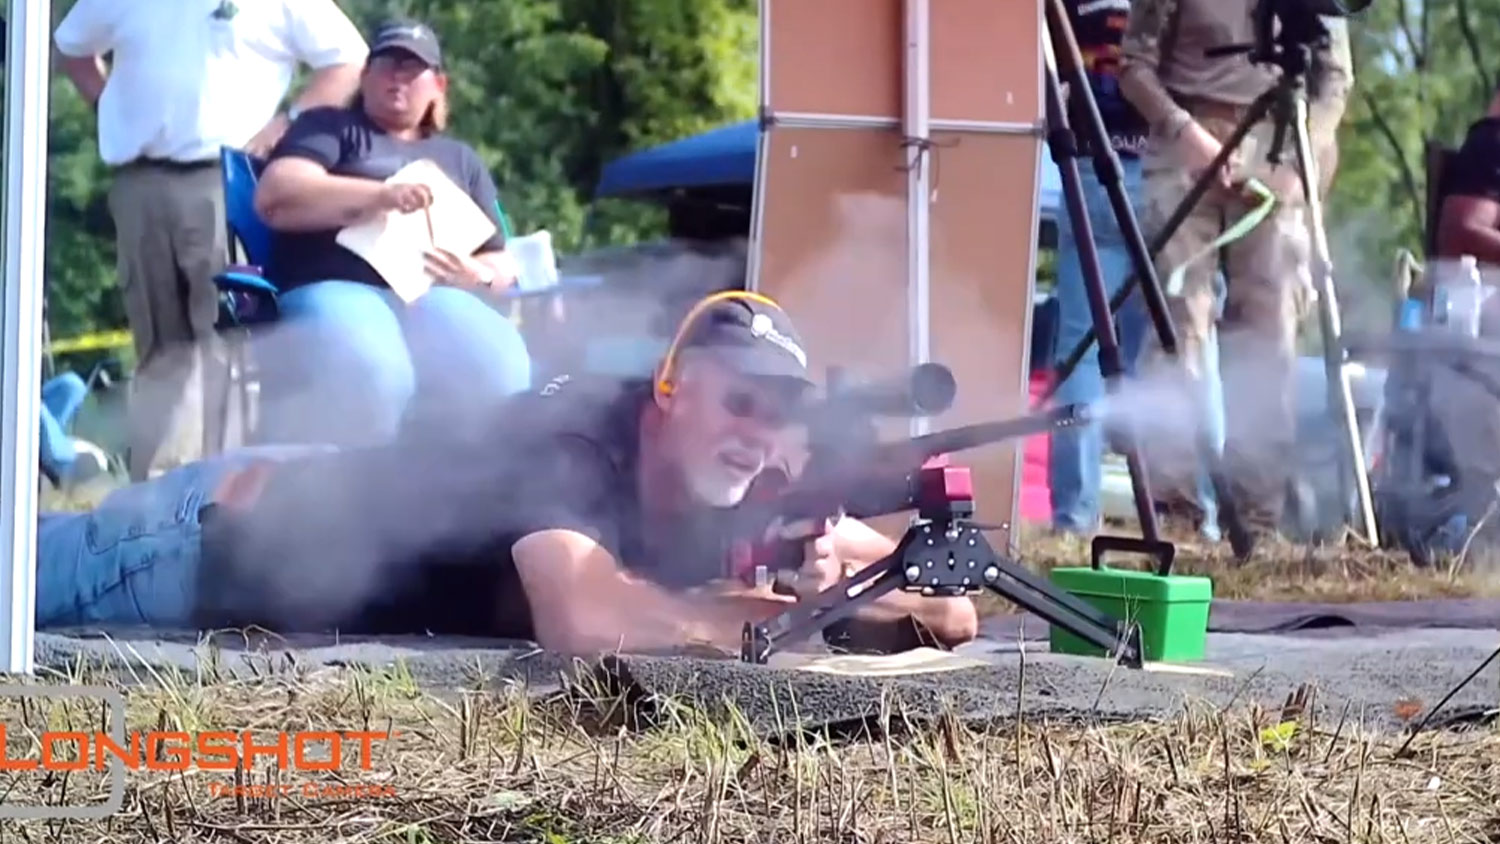 Randy Wise connected at 2,158 yards with a Savage .338 Lapua rifle, setting a new ELR Central World Record in the process at the 2019 NRA Extreme Long-Range Nationals.